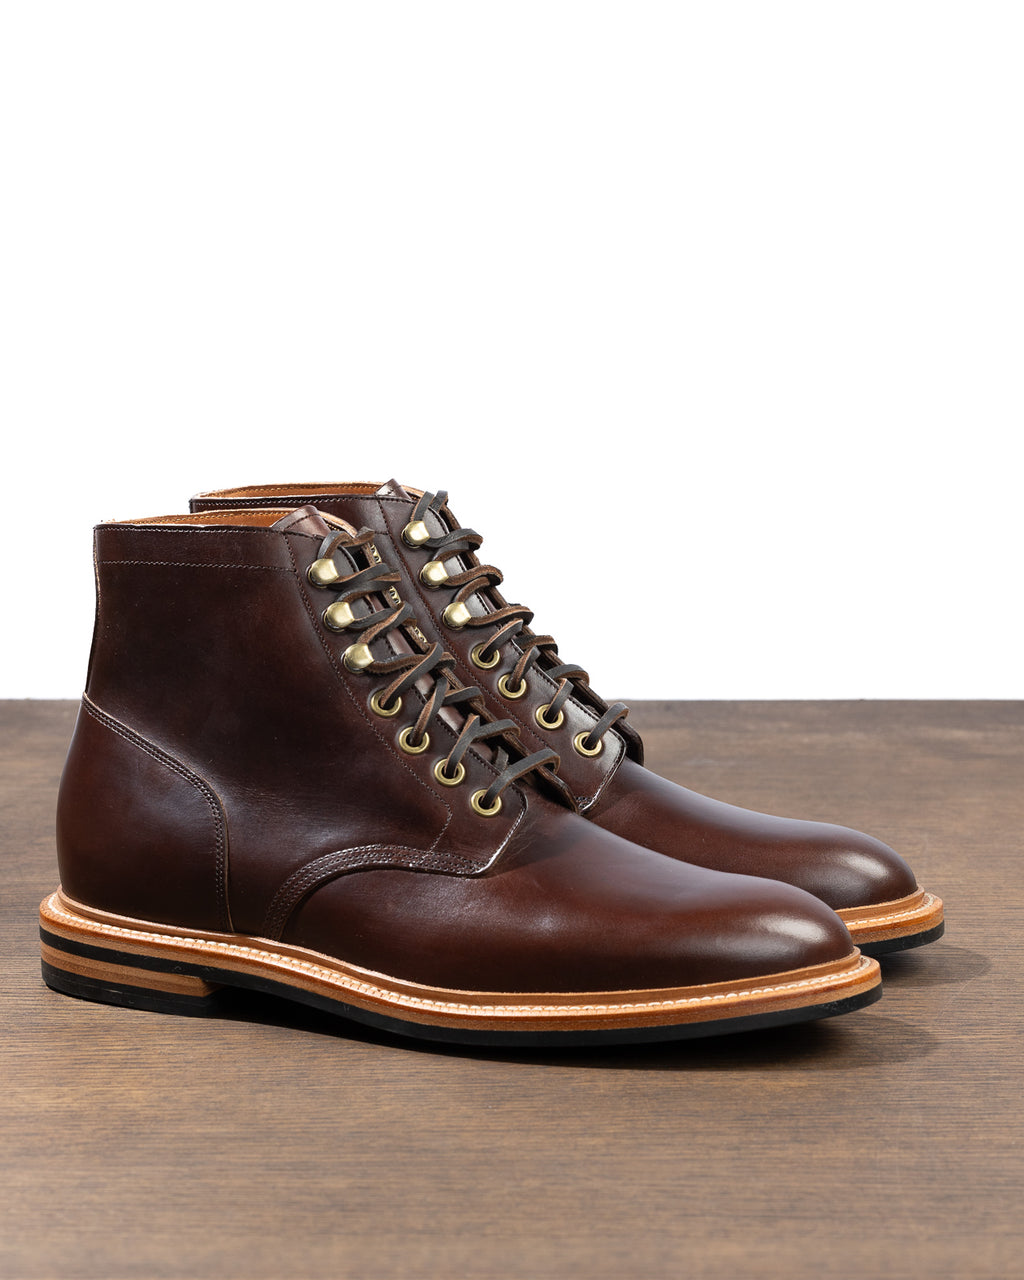 In Review: Grant Stone Boots – The Diesel